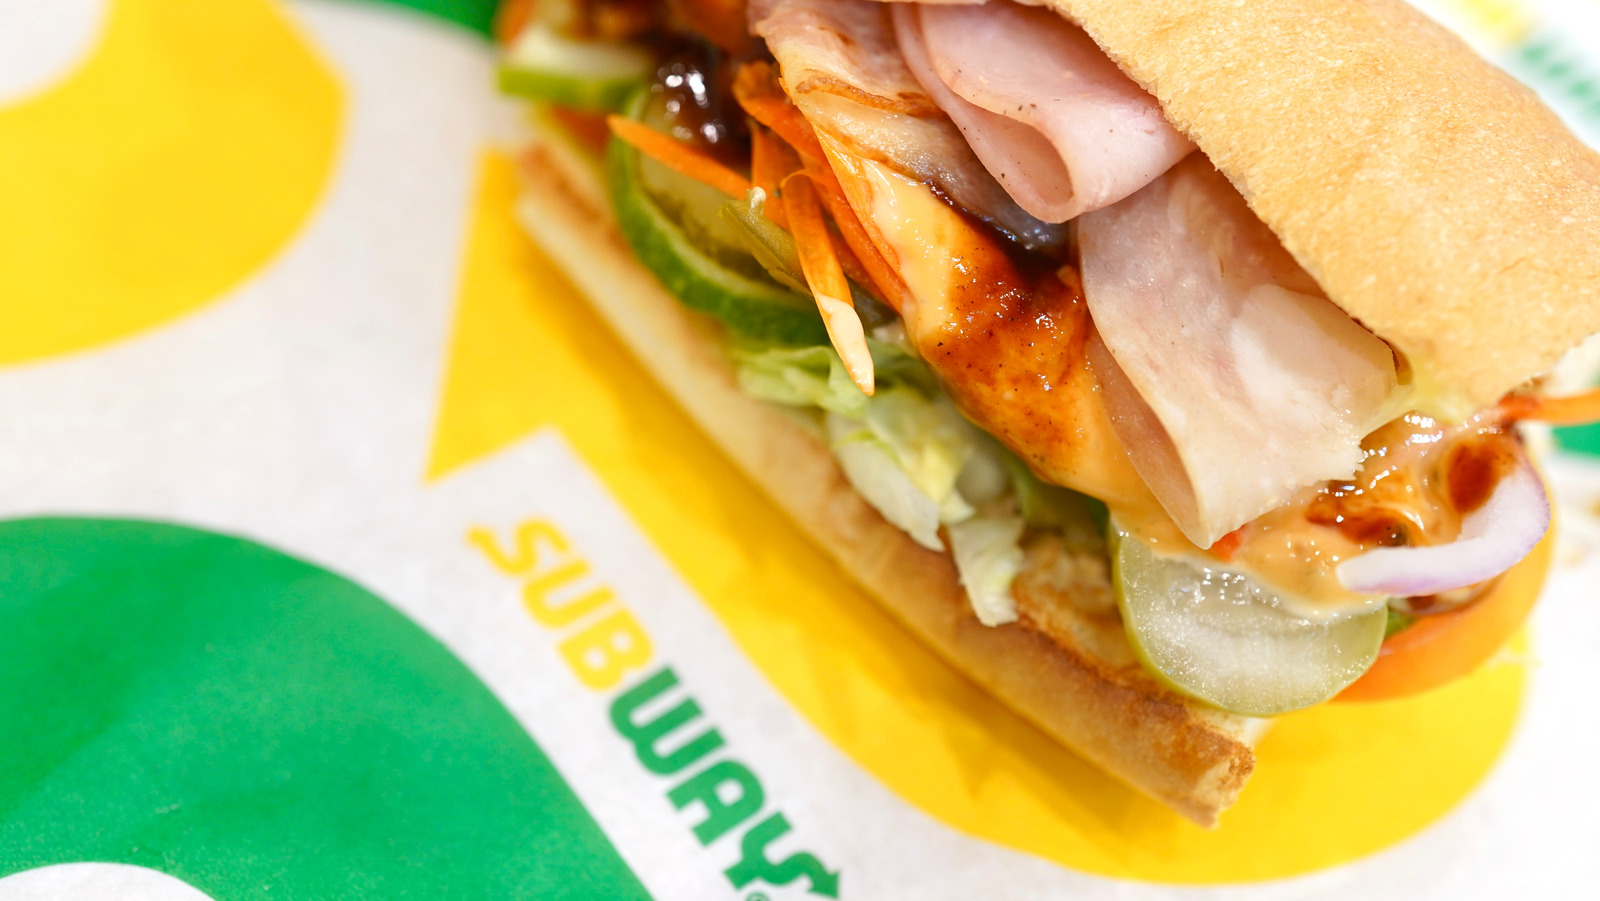 Subway's Footlong Pass Subscription Is Returning. Here's How To Get One